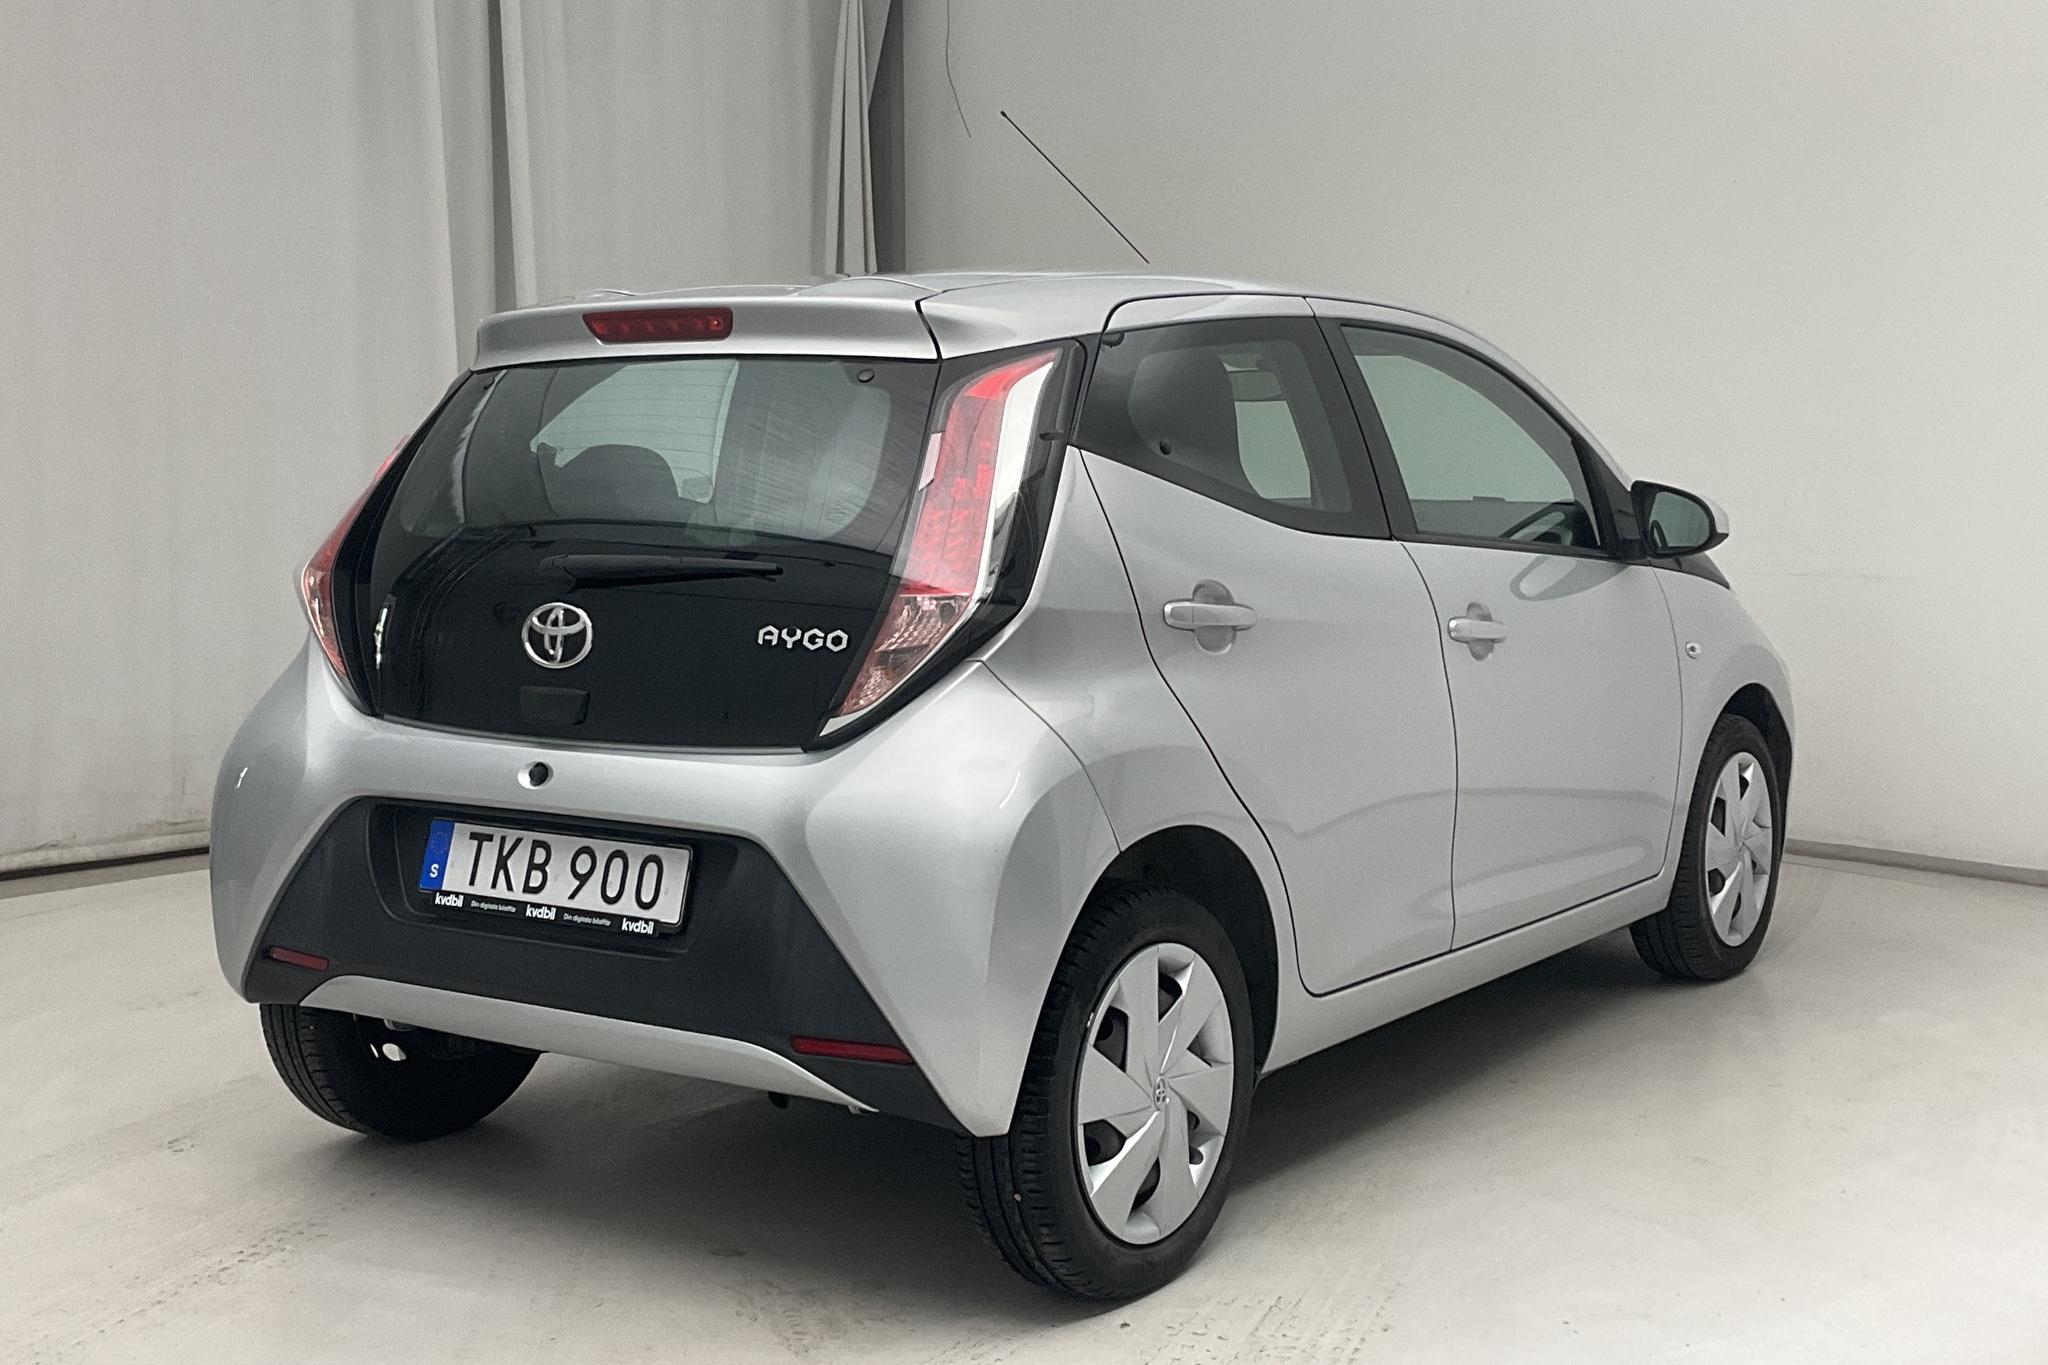 Toyota Aygo 1.0 5dr (69hk) - 1 635 mil - Automat - silver - 2015